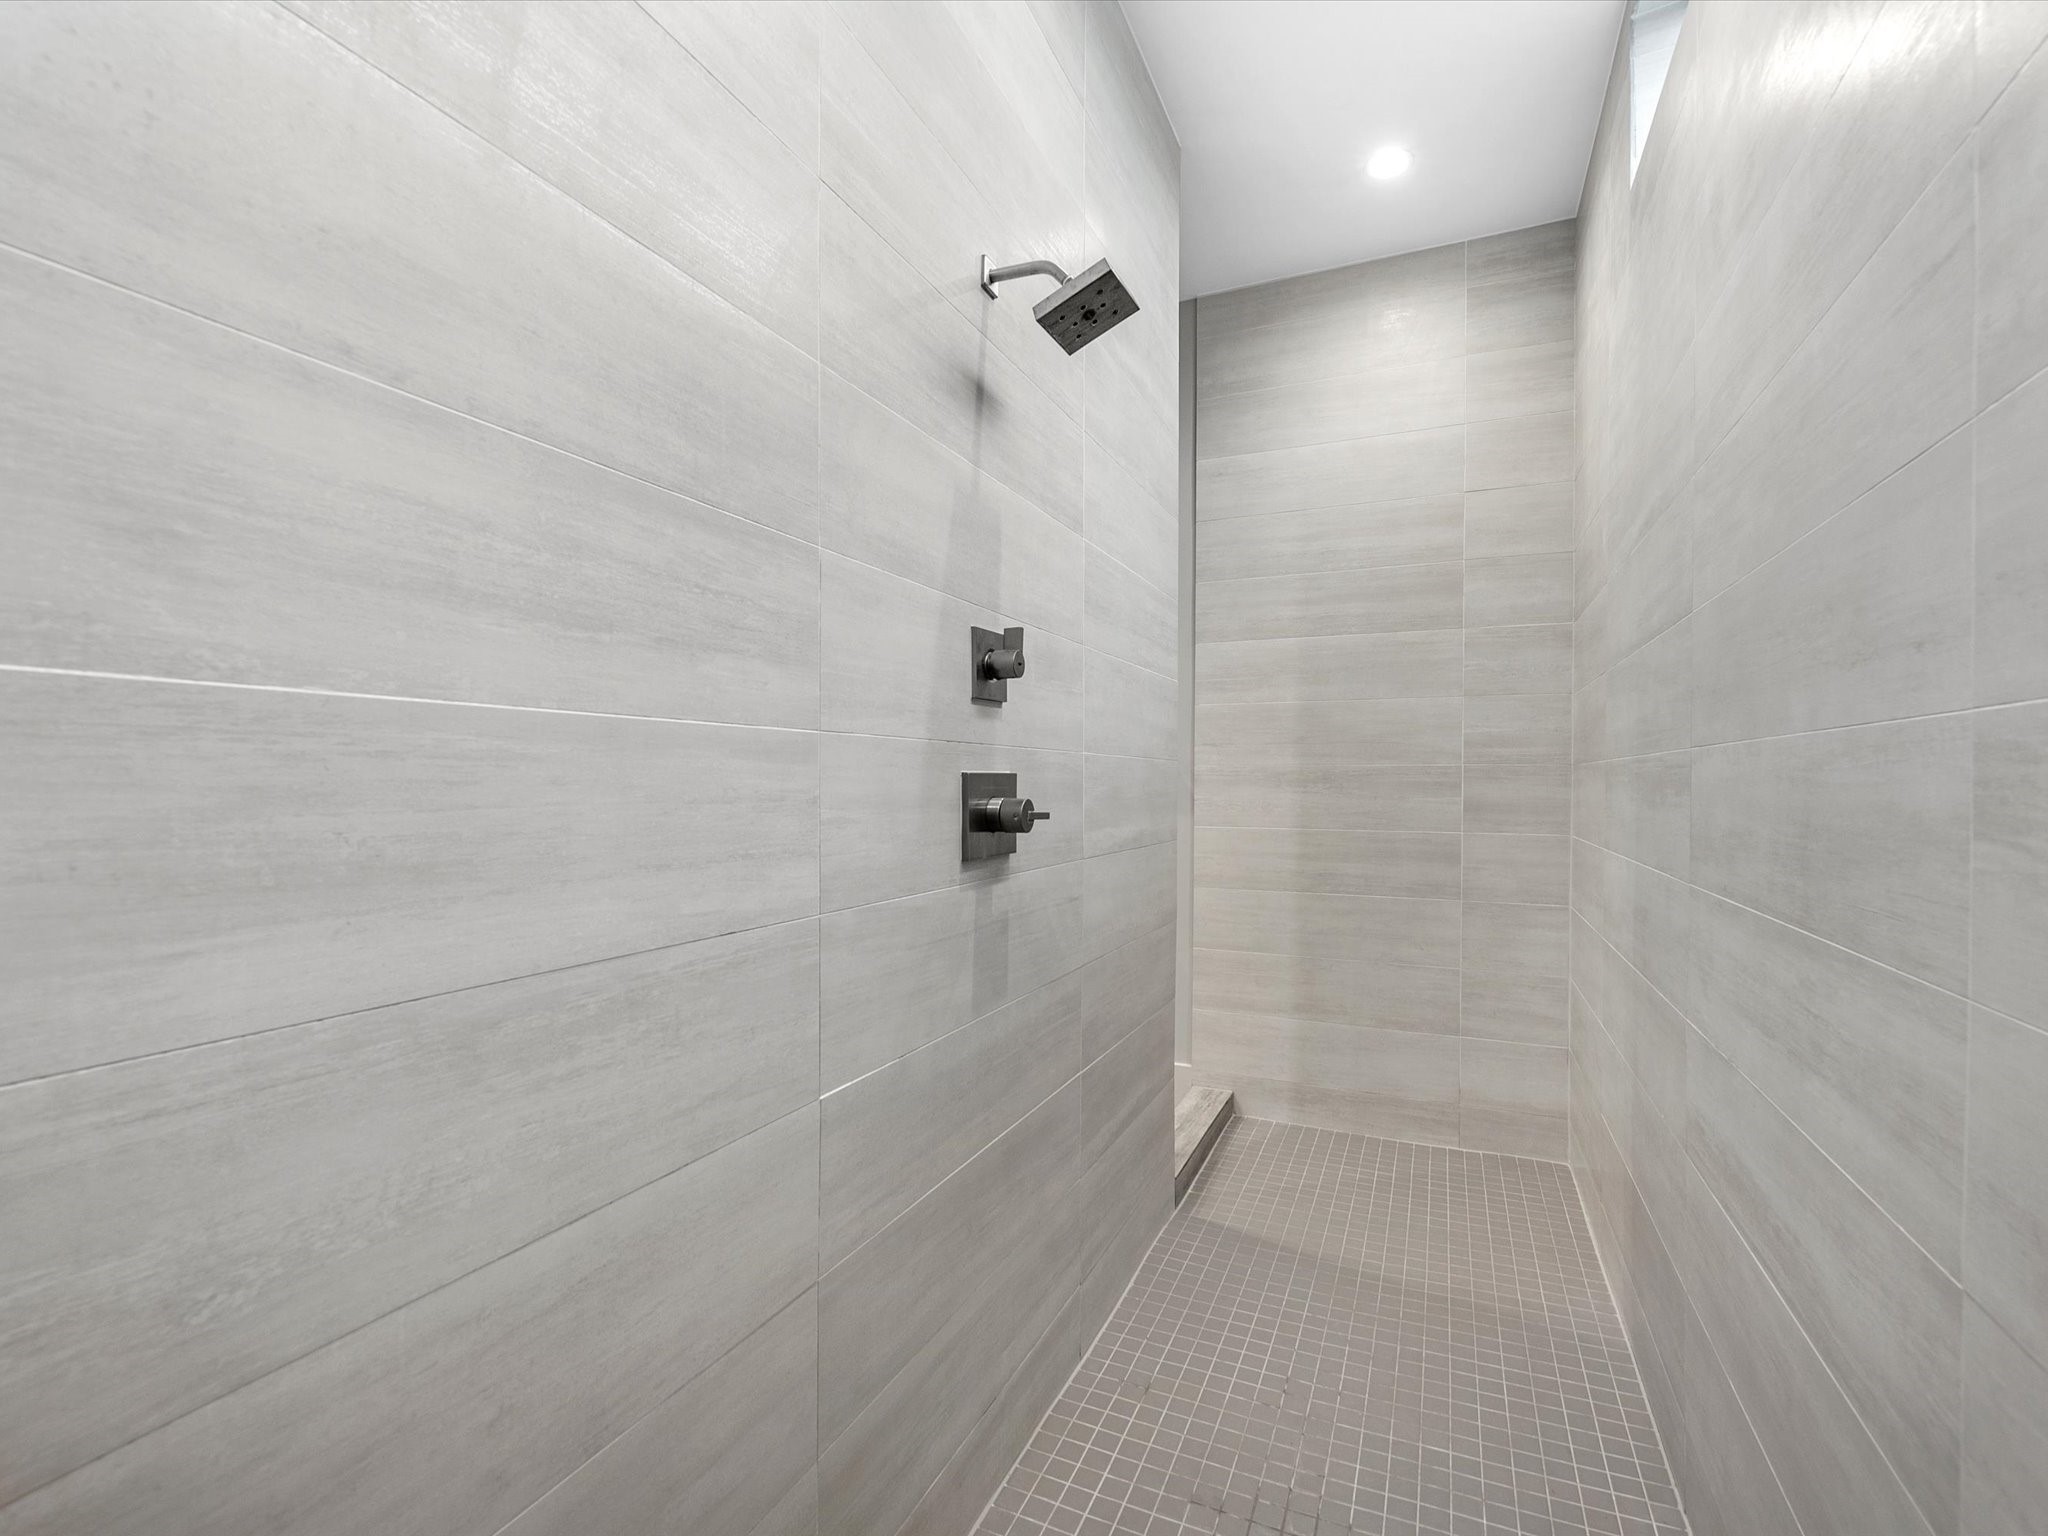 The walk-in shower features tile surround and recessed lighting!